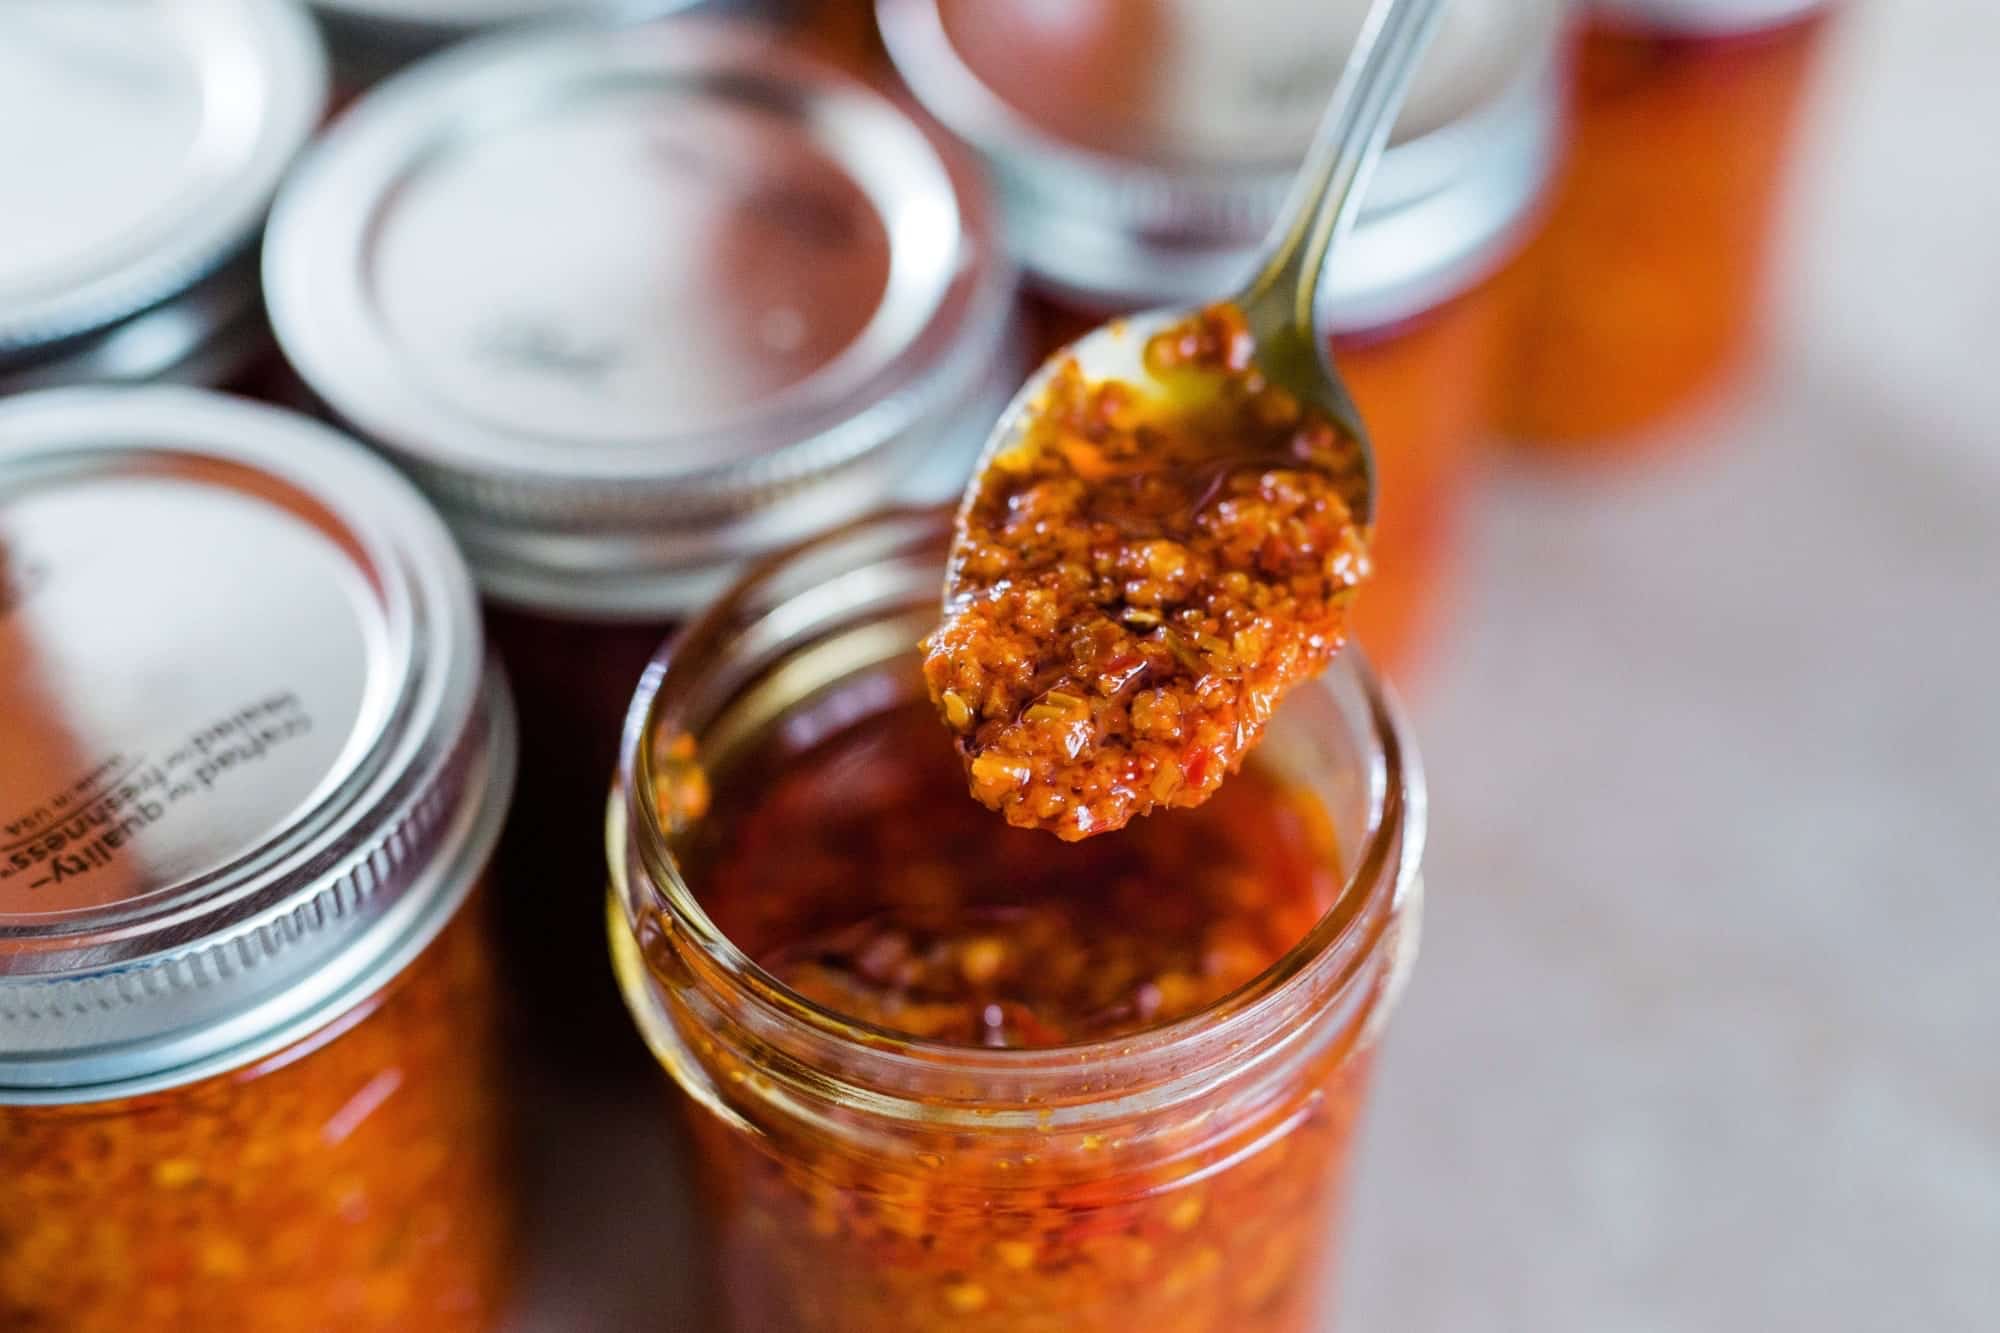 Does Chili Paste Need To Be Refrigerated? - PepperScale